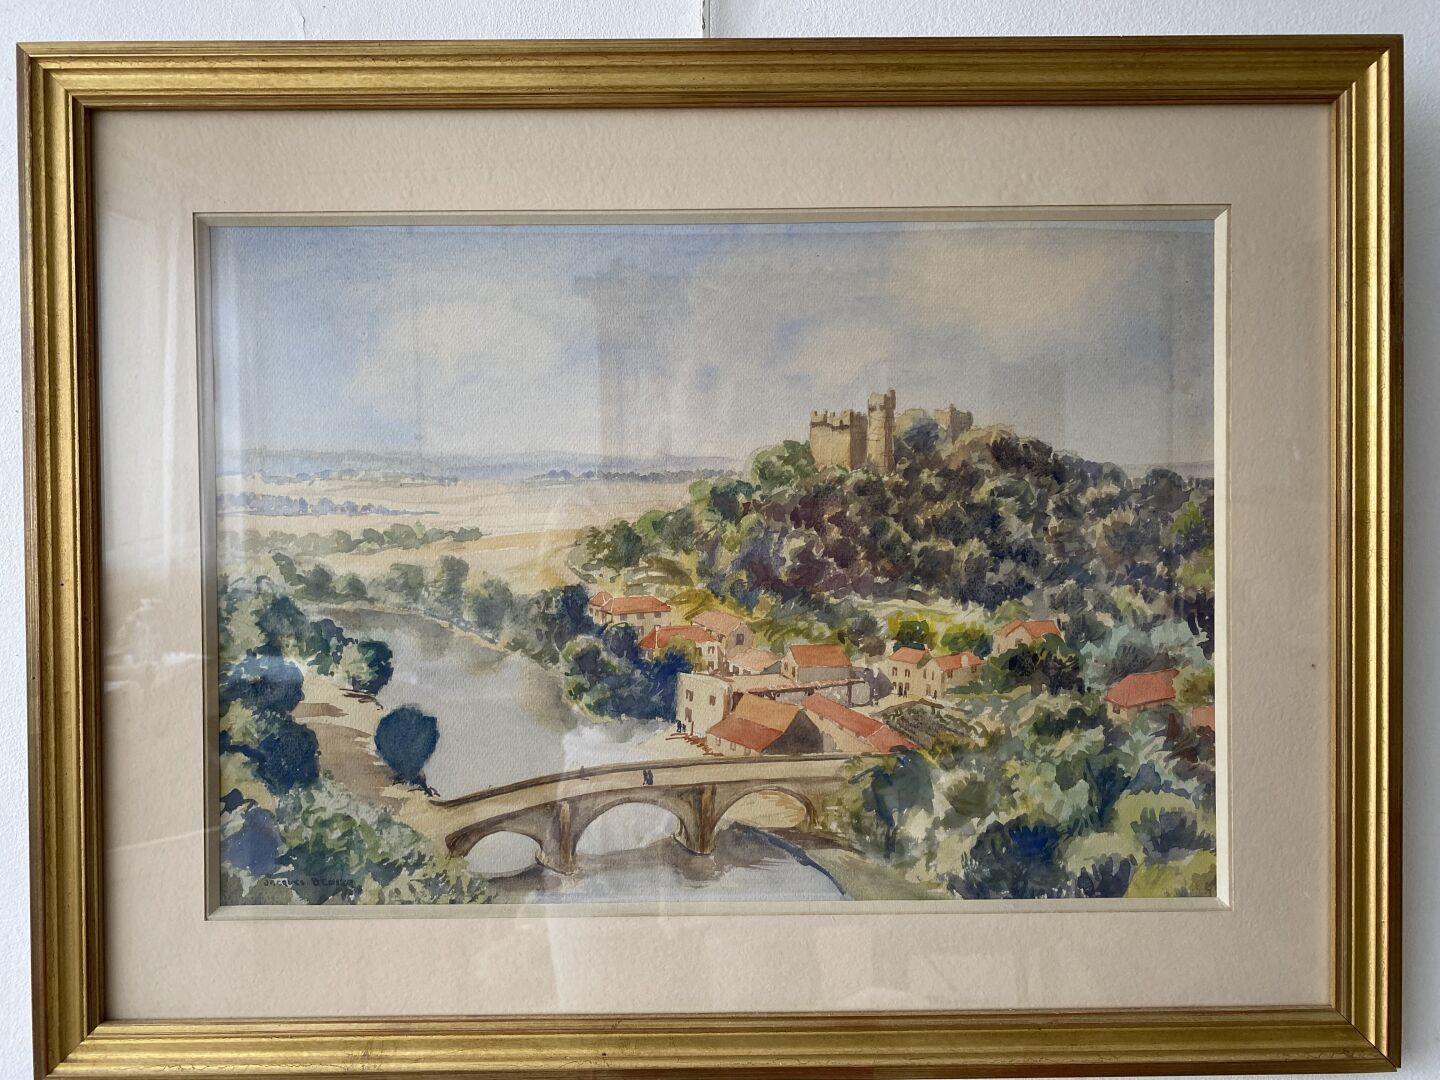 Null Jacques DENIER (1894-1983)

View of a village with a castle and a bridge

W&hellip;